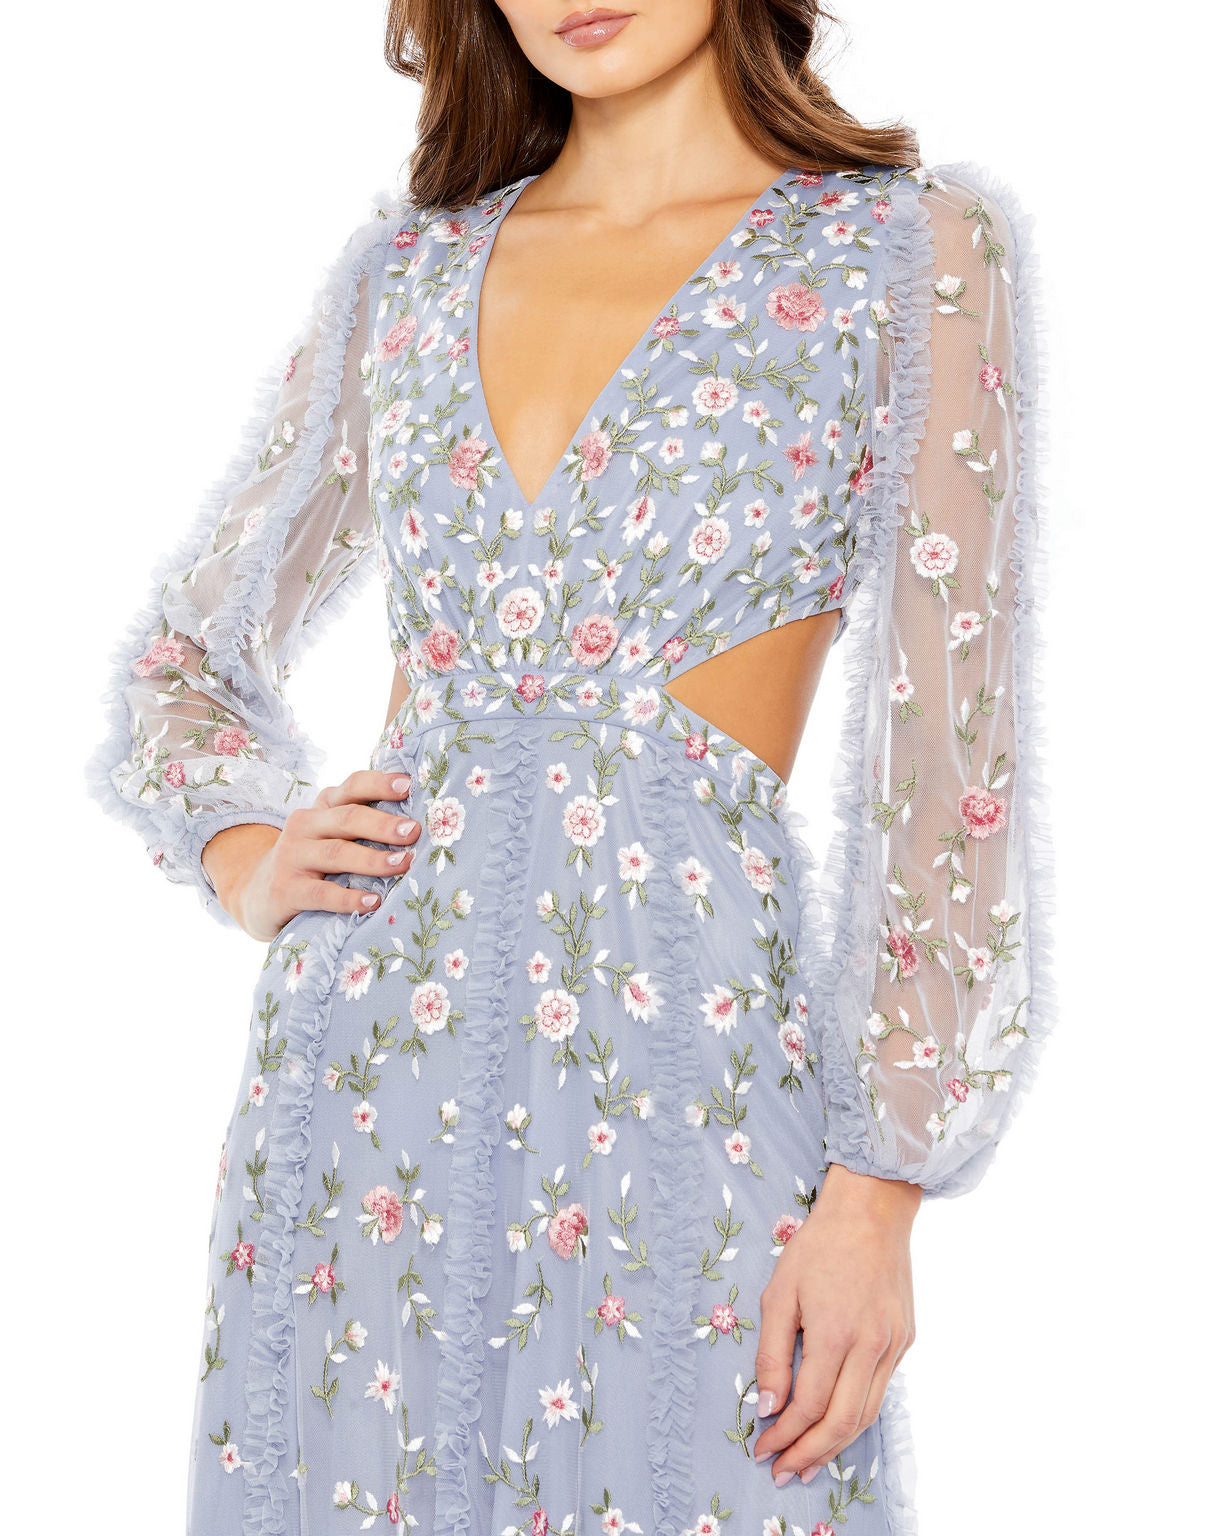 Prom Dresses Long Sleeve Floral Cut Out Formal Prom Dress Periwinkle